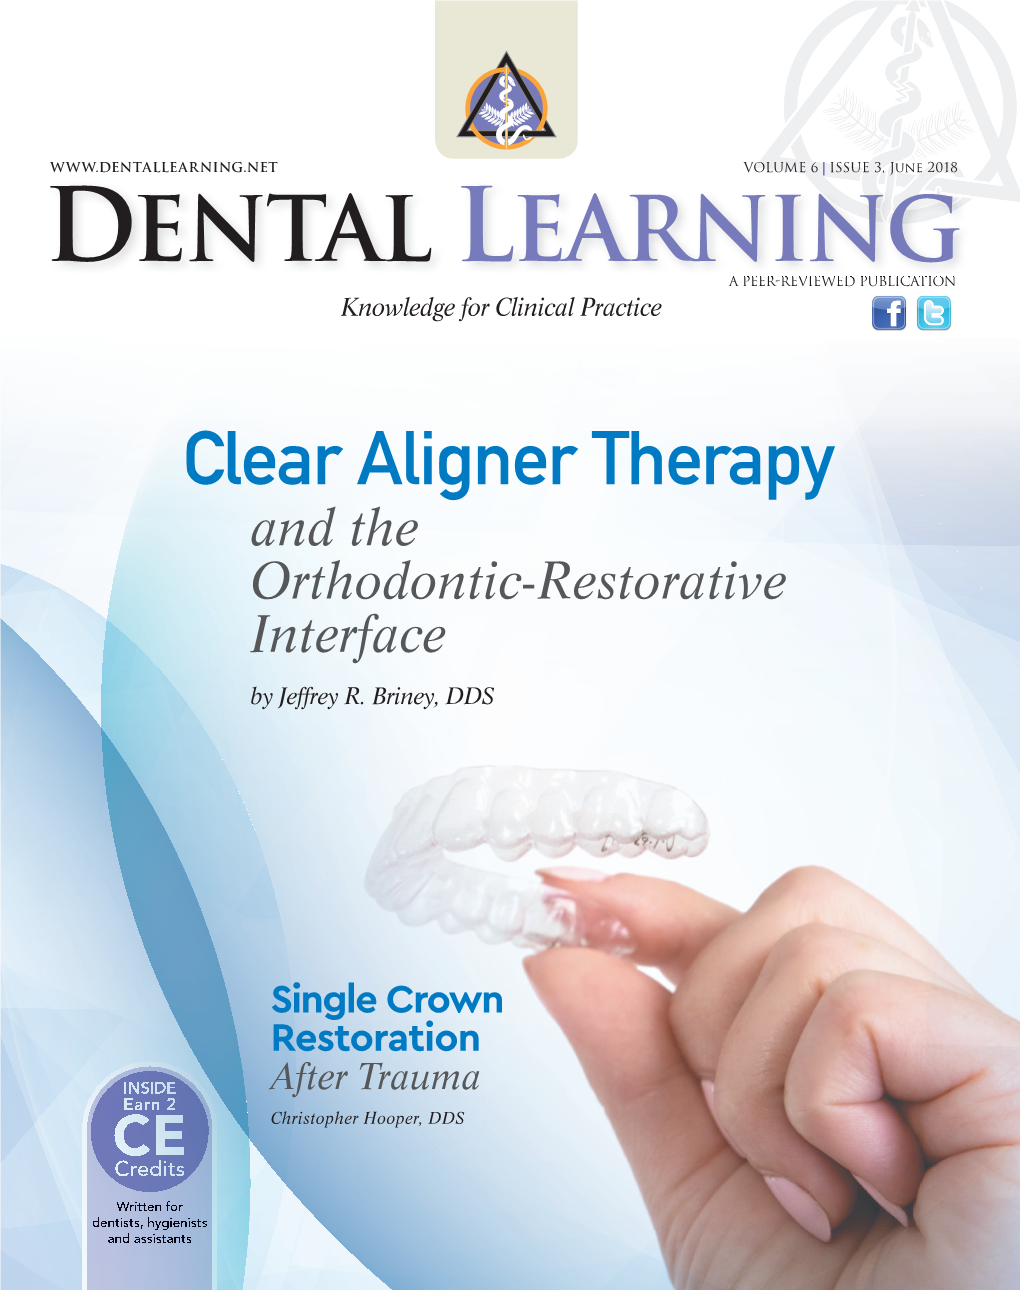 Clearaligner-Therapy and the Orthodontic-Restorative Interface